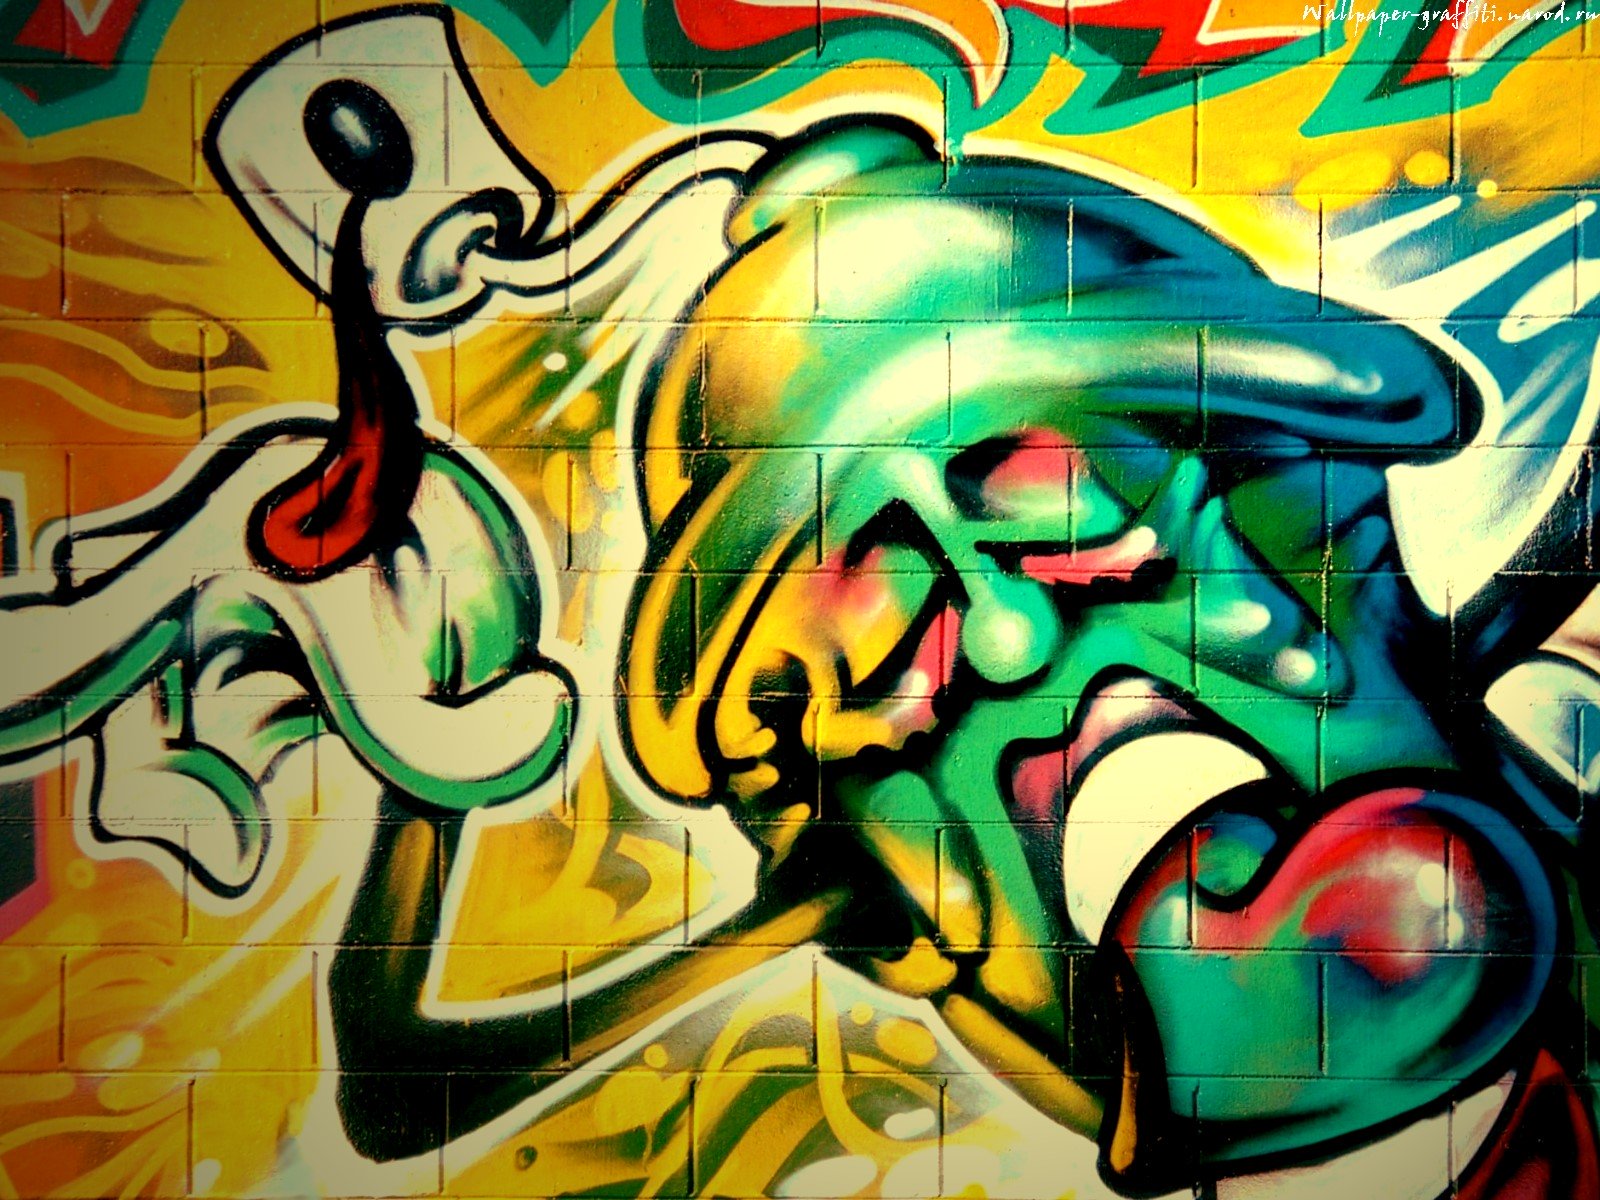 Gallery For Gt Really Cool Graffiti Background